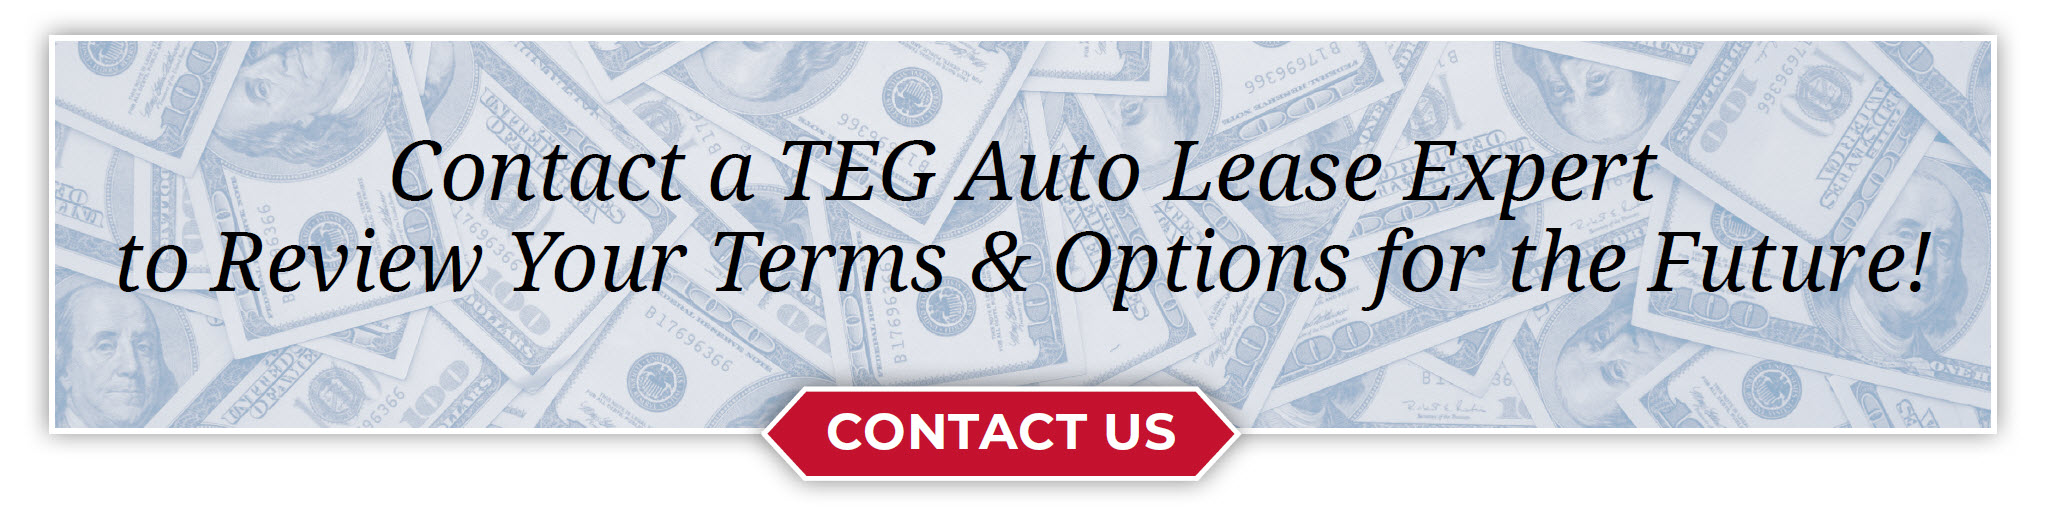 Contact a TEG Auto Lease Expert to Review Your Terms & Options for the Future!